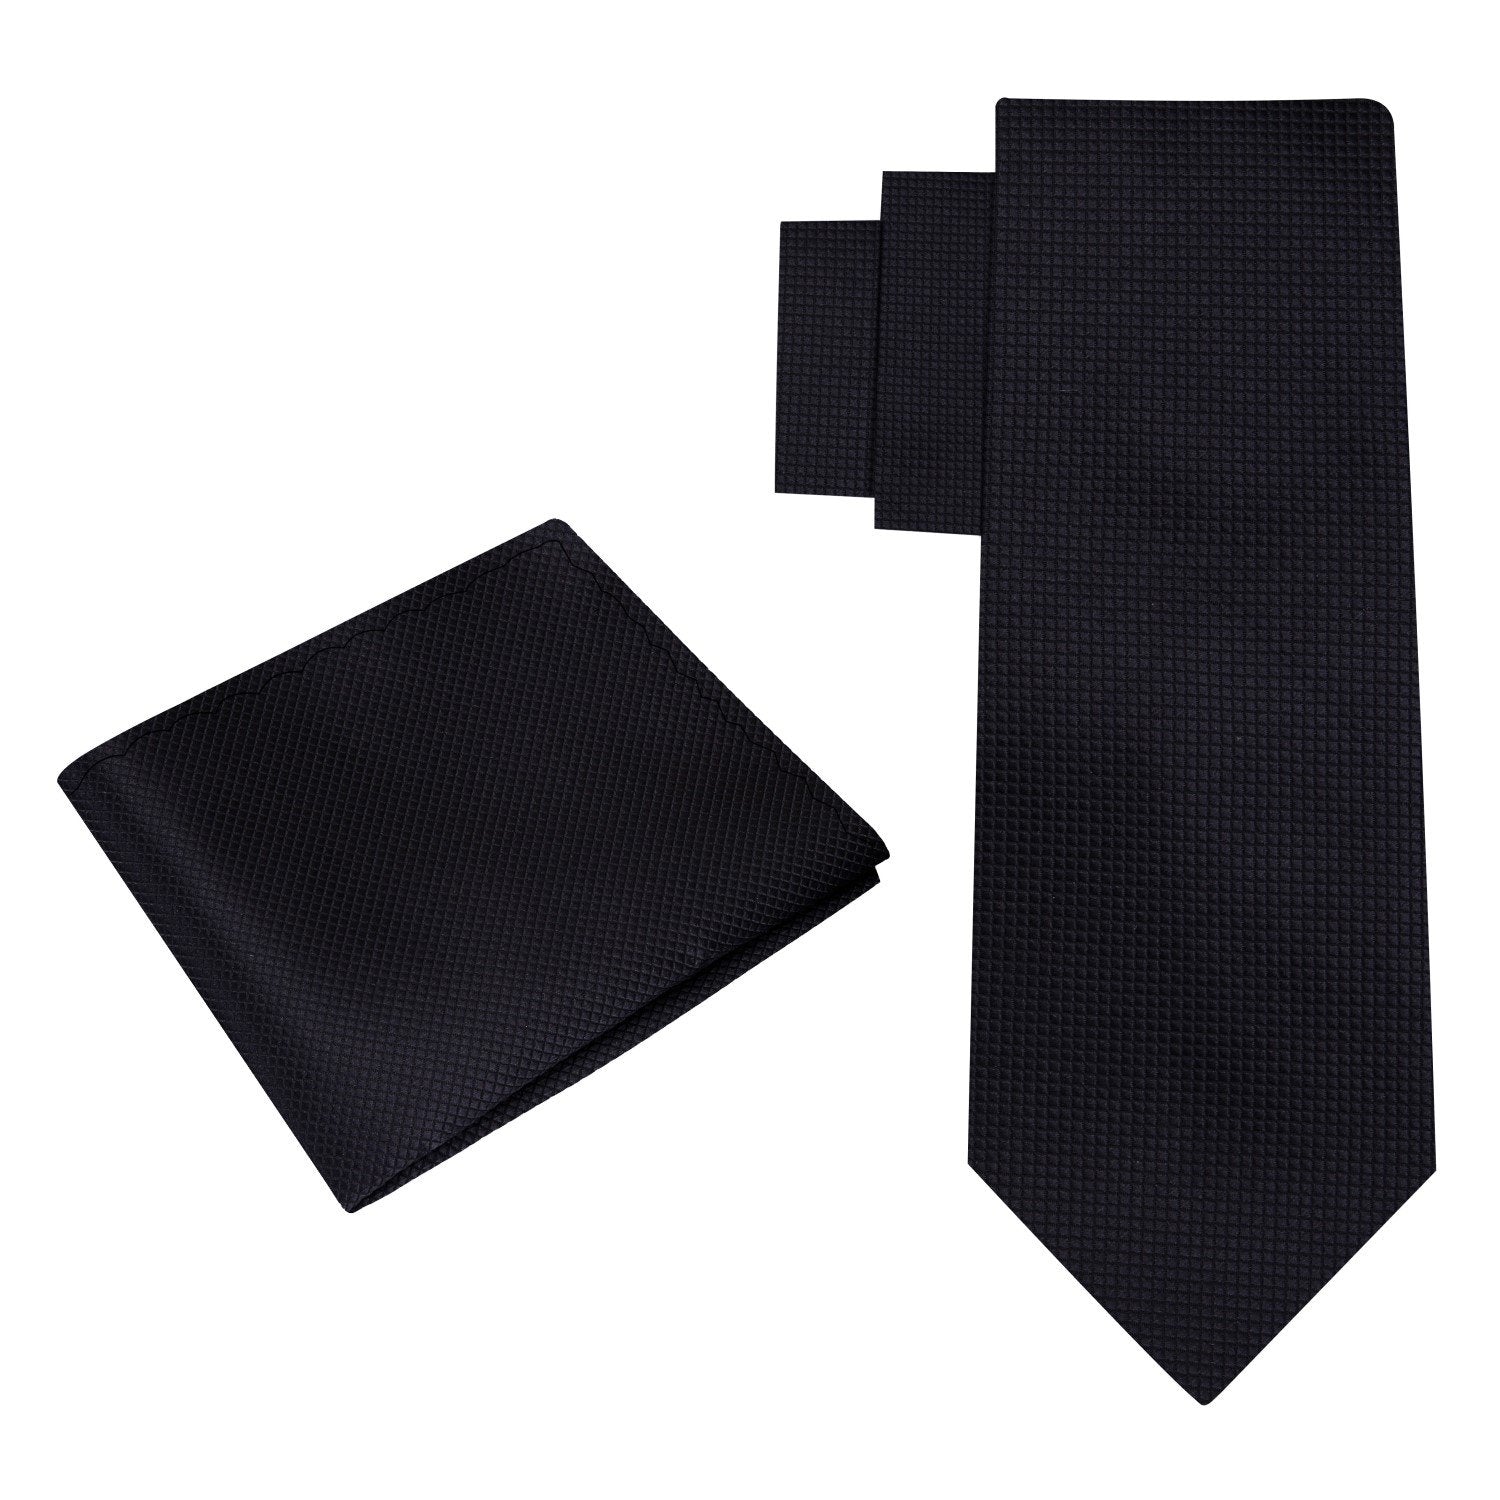 Alt View: A Solid Black With Check Texture Pattern Silk Necktie, Matching Pocket Square